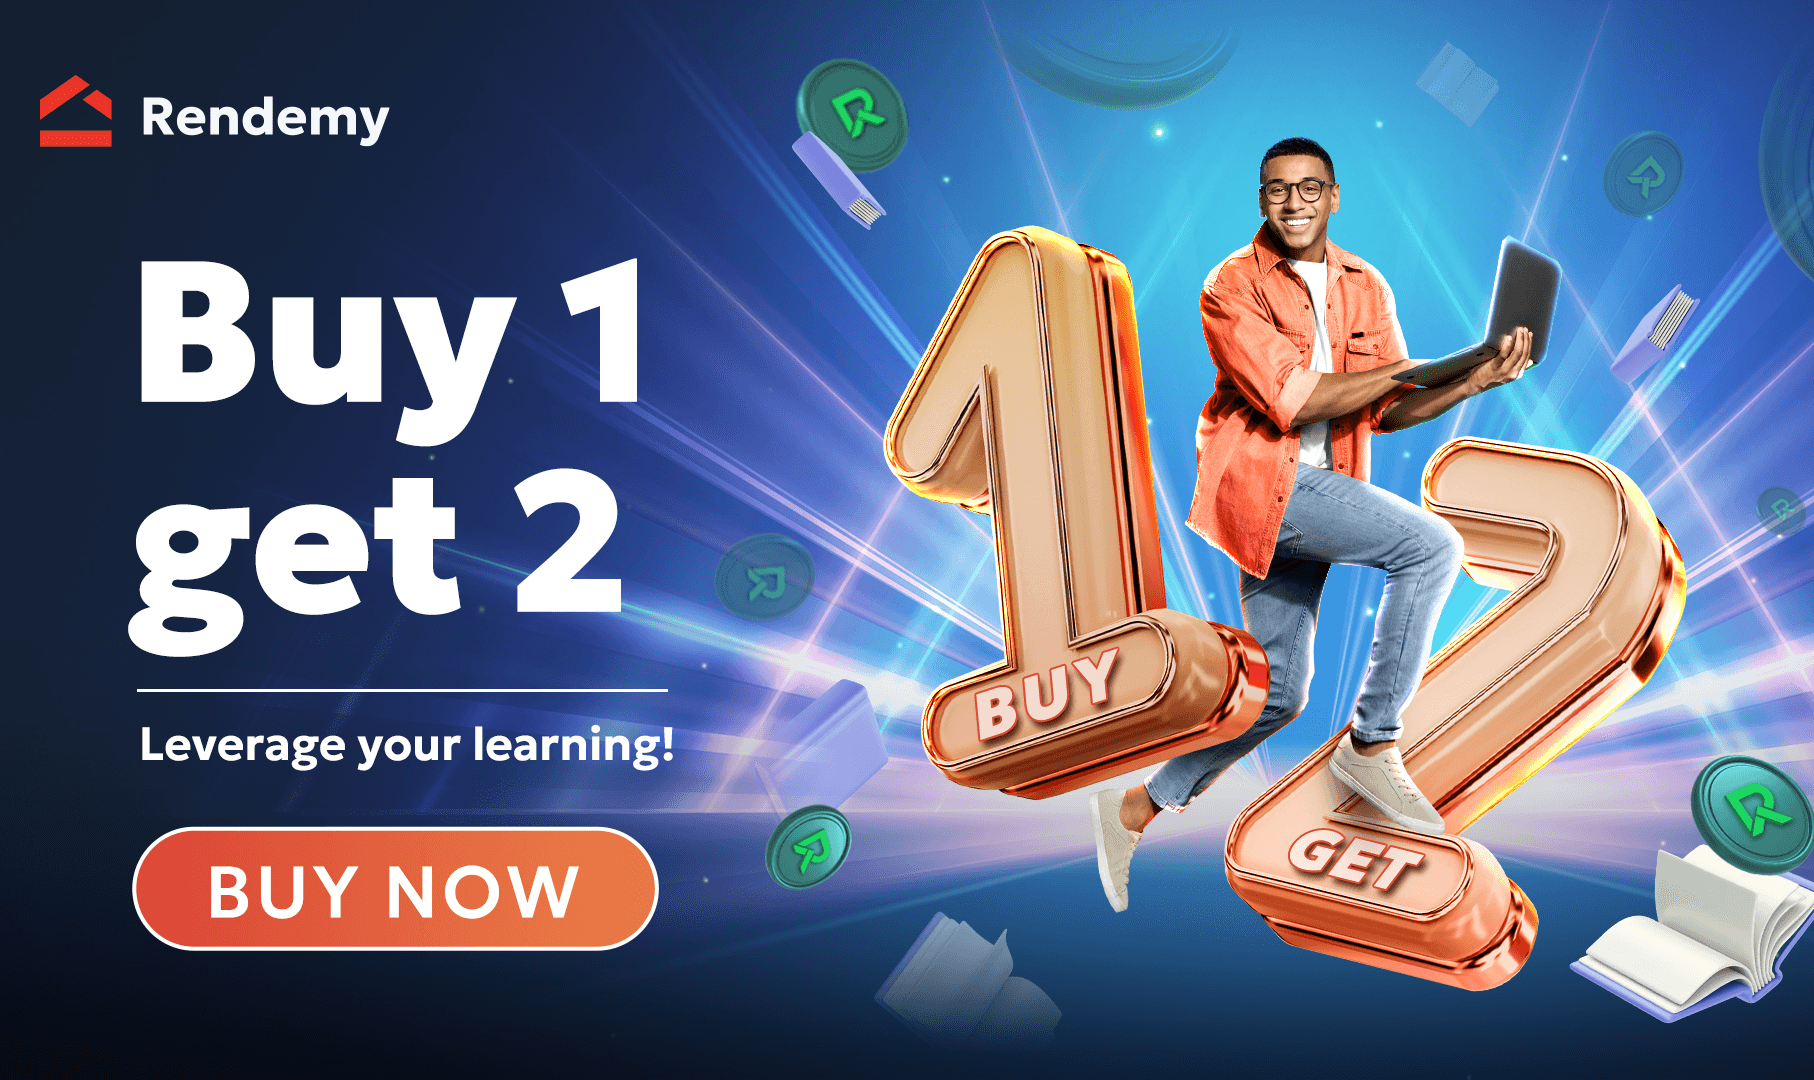 [HOT] Buy 1 get 2 free! - Leverage your learning avatar